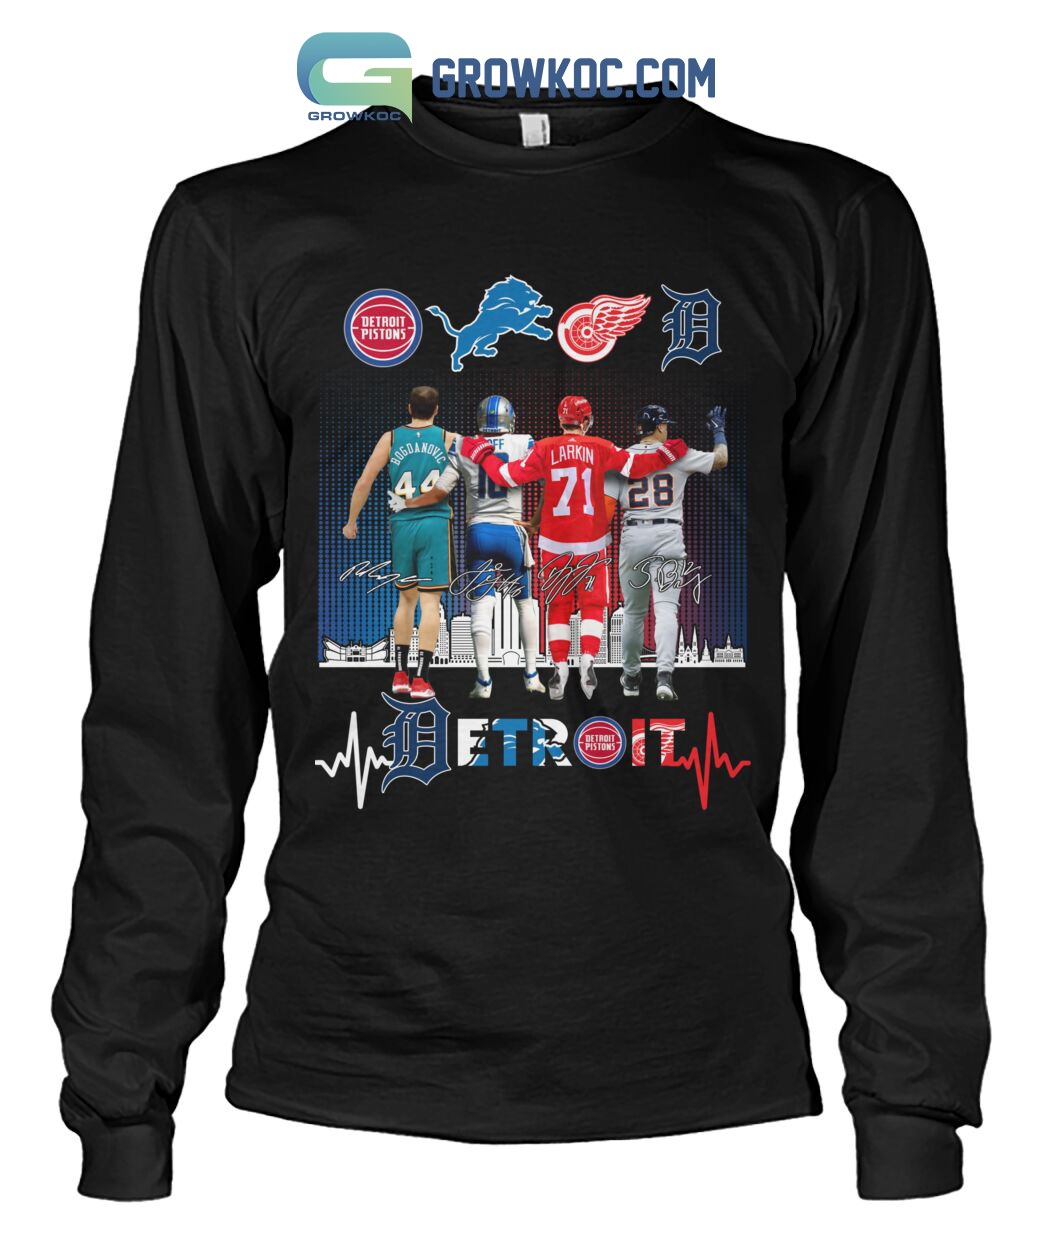 Detroit Lions Pistons Red Wings And Tigers Legend Team T Shirt - Growkoc